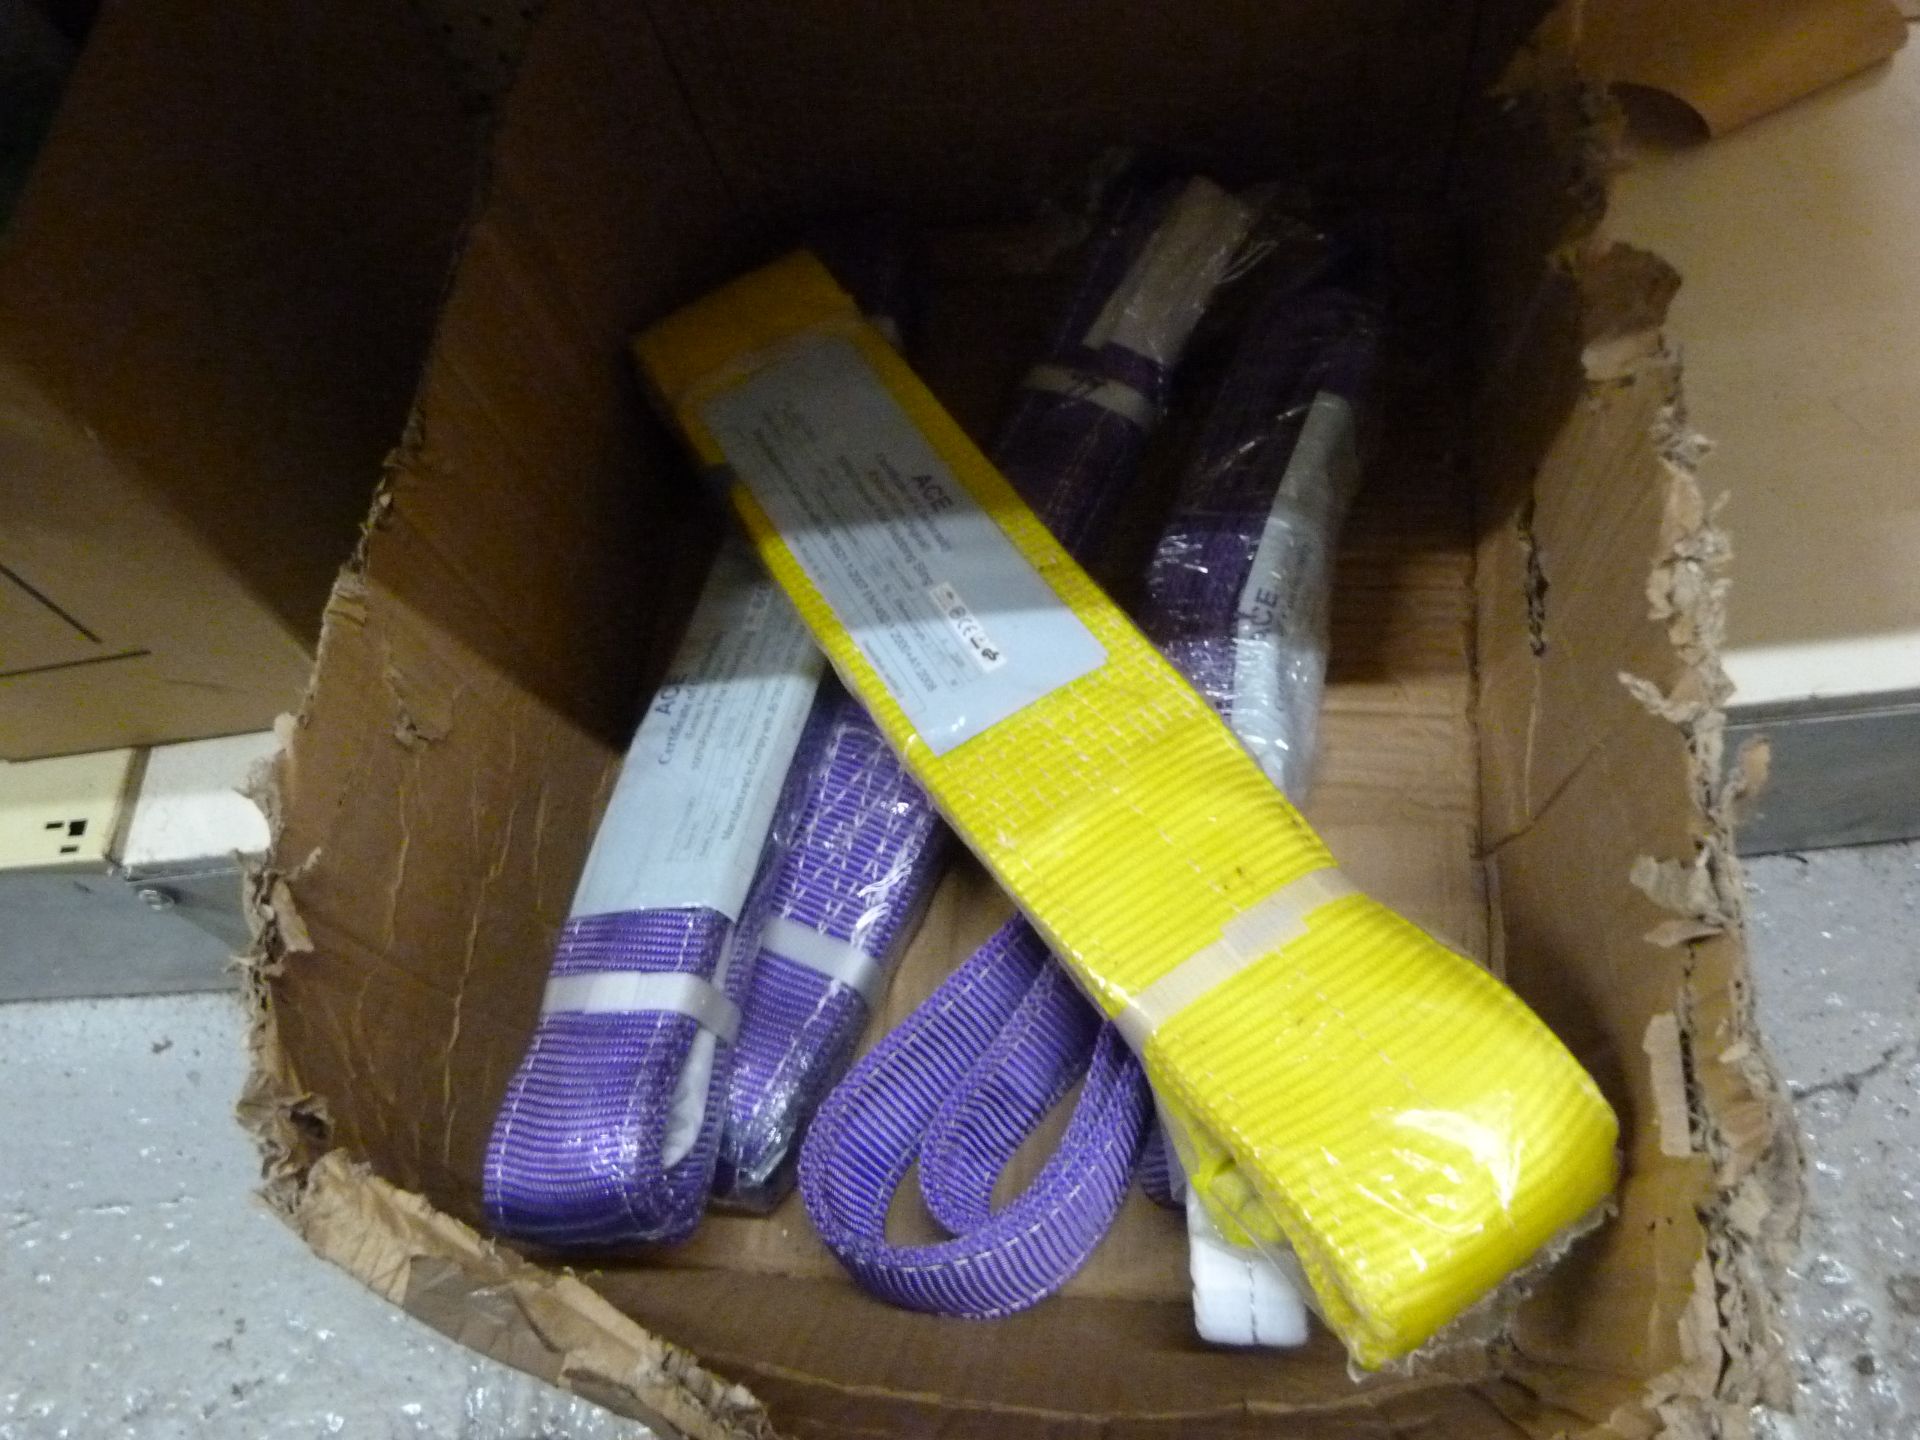 *Box of Four 1-ton 3m Slings and One 3-ton 2m Sling